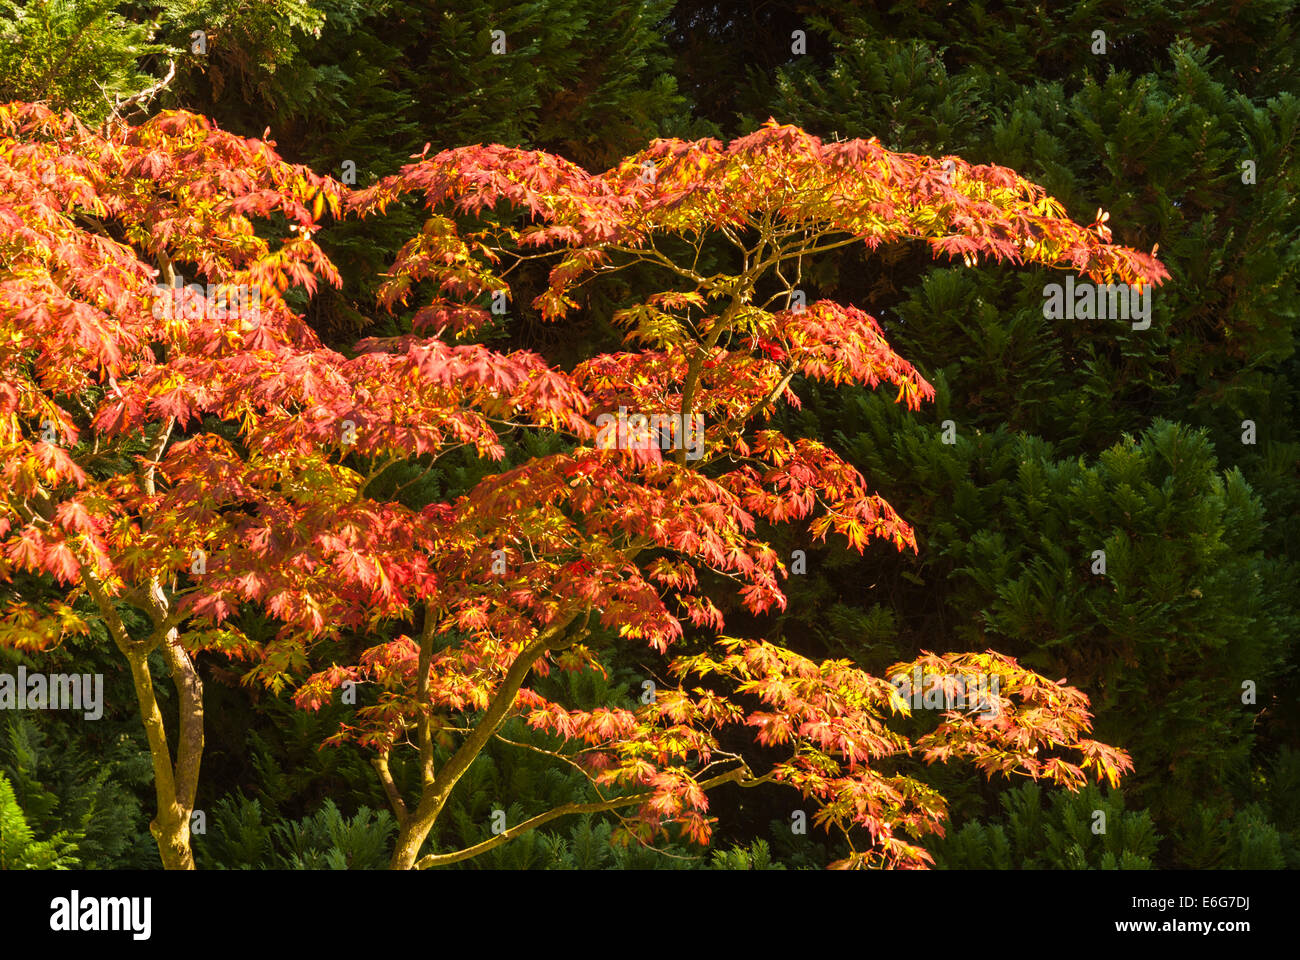 An Acer Tree in sunlight against the dark green of the pines. Stock Photo